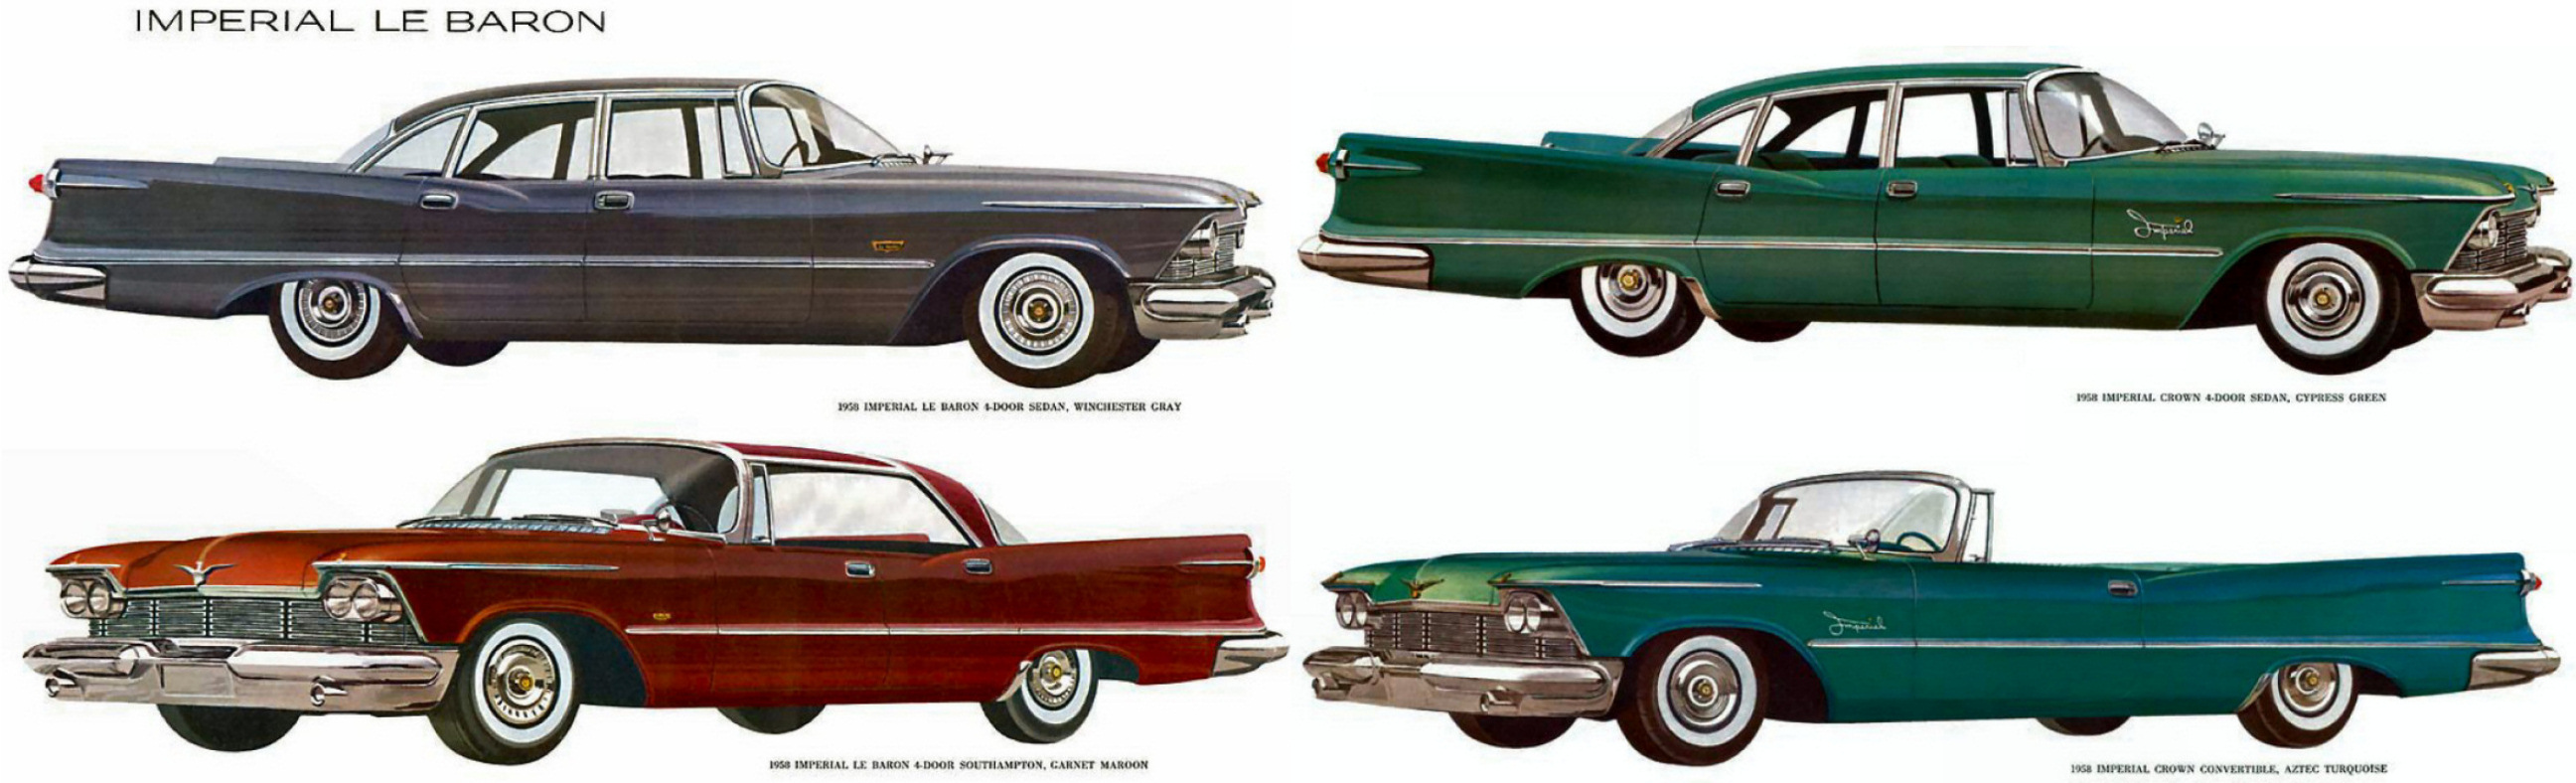 1958 Imperial Foldout-11-12